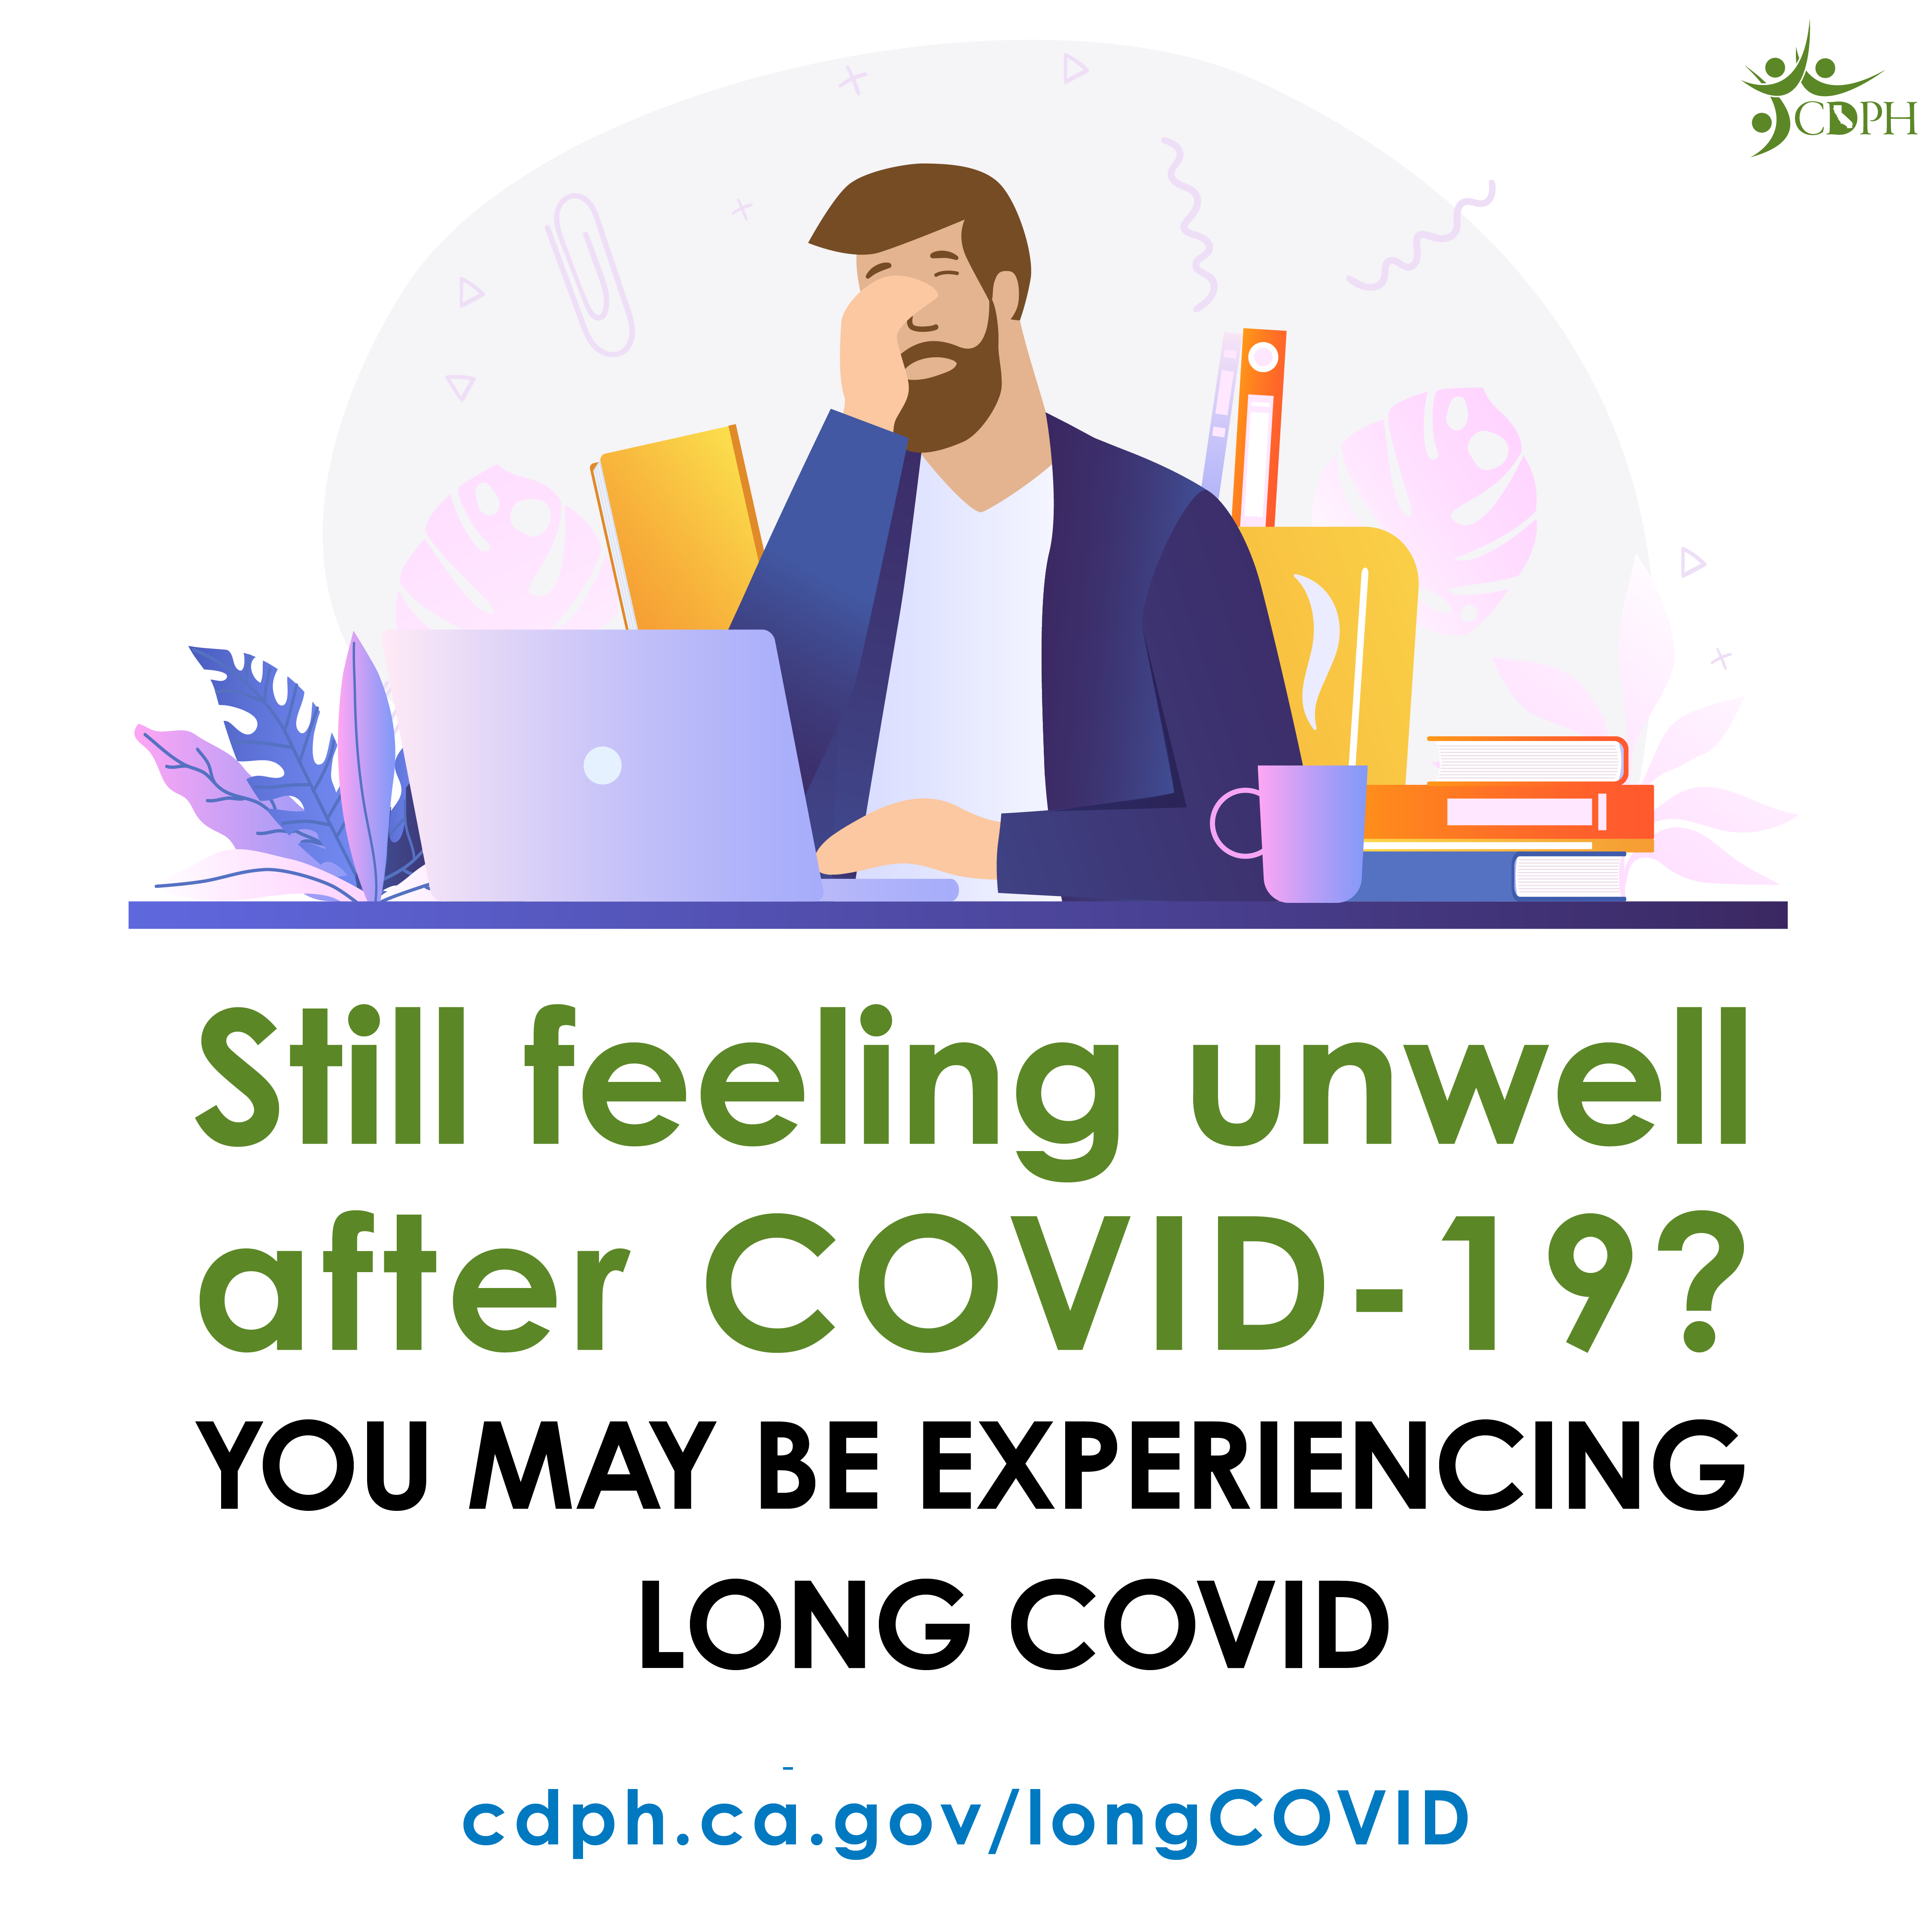 Still feeling unwell after COVID-19? You may be experiencing Long COVID